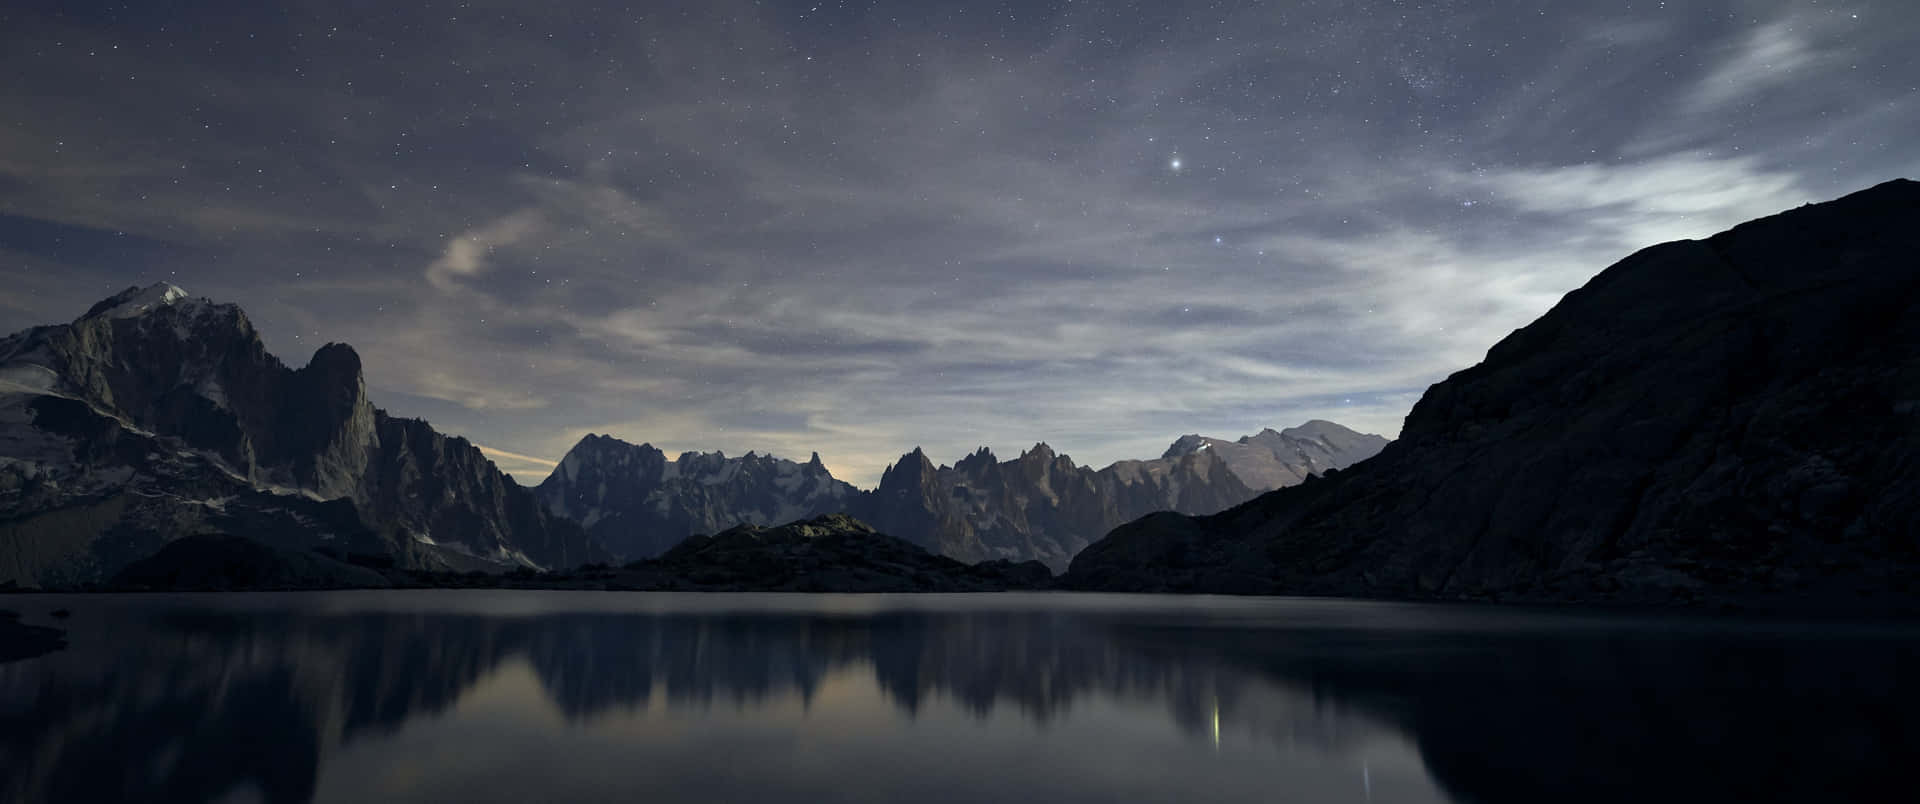 a mountain range is reflected in a lake at night